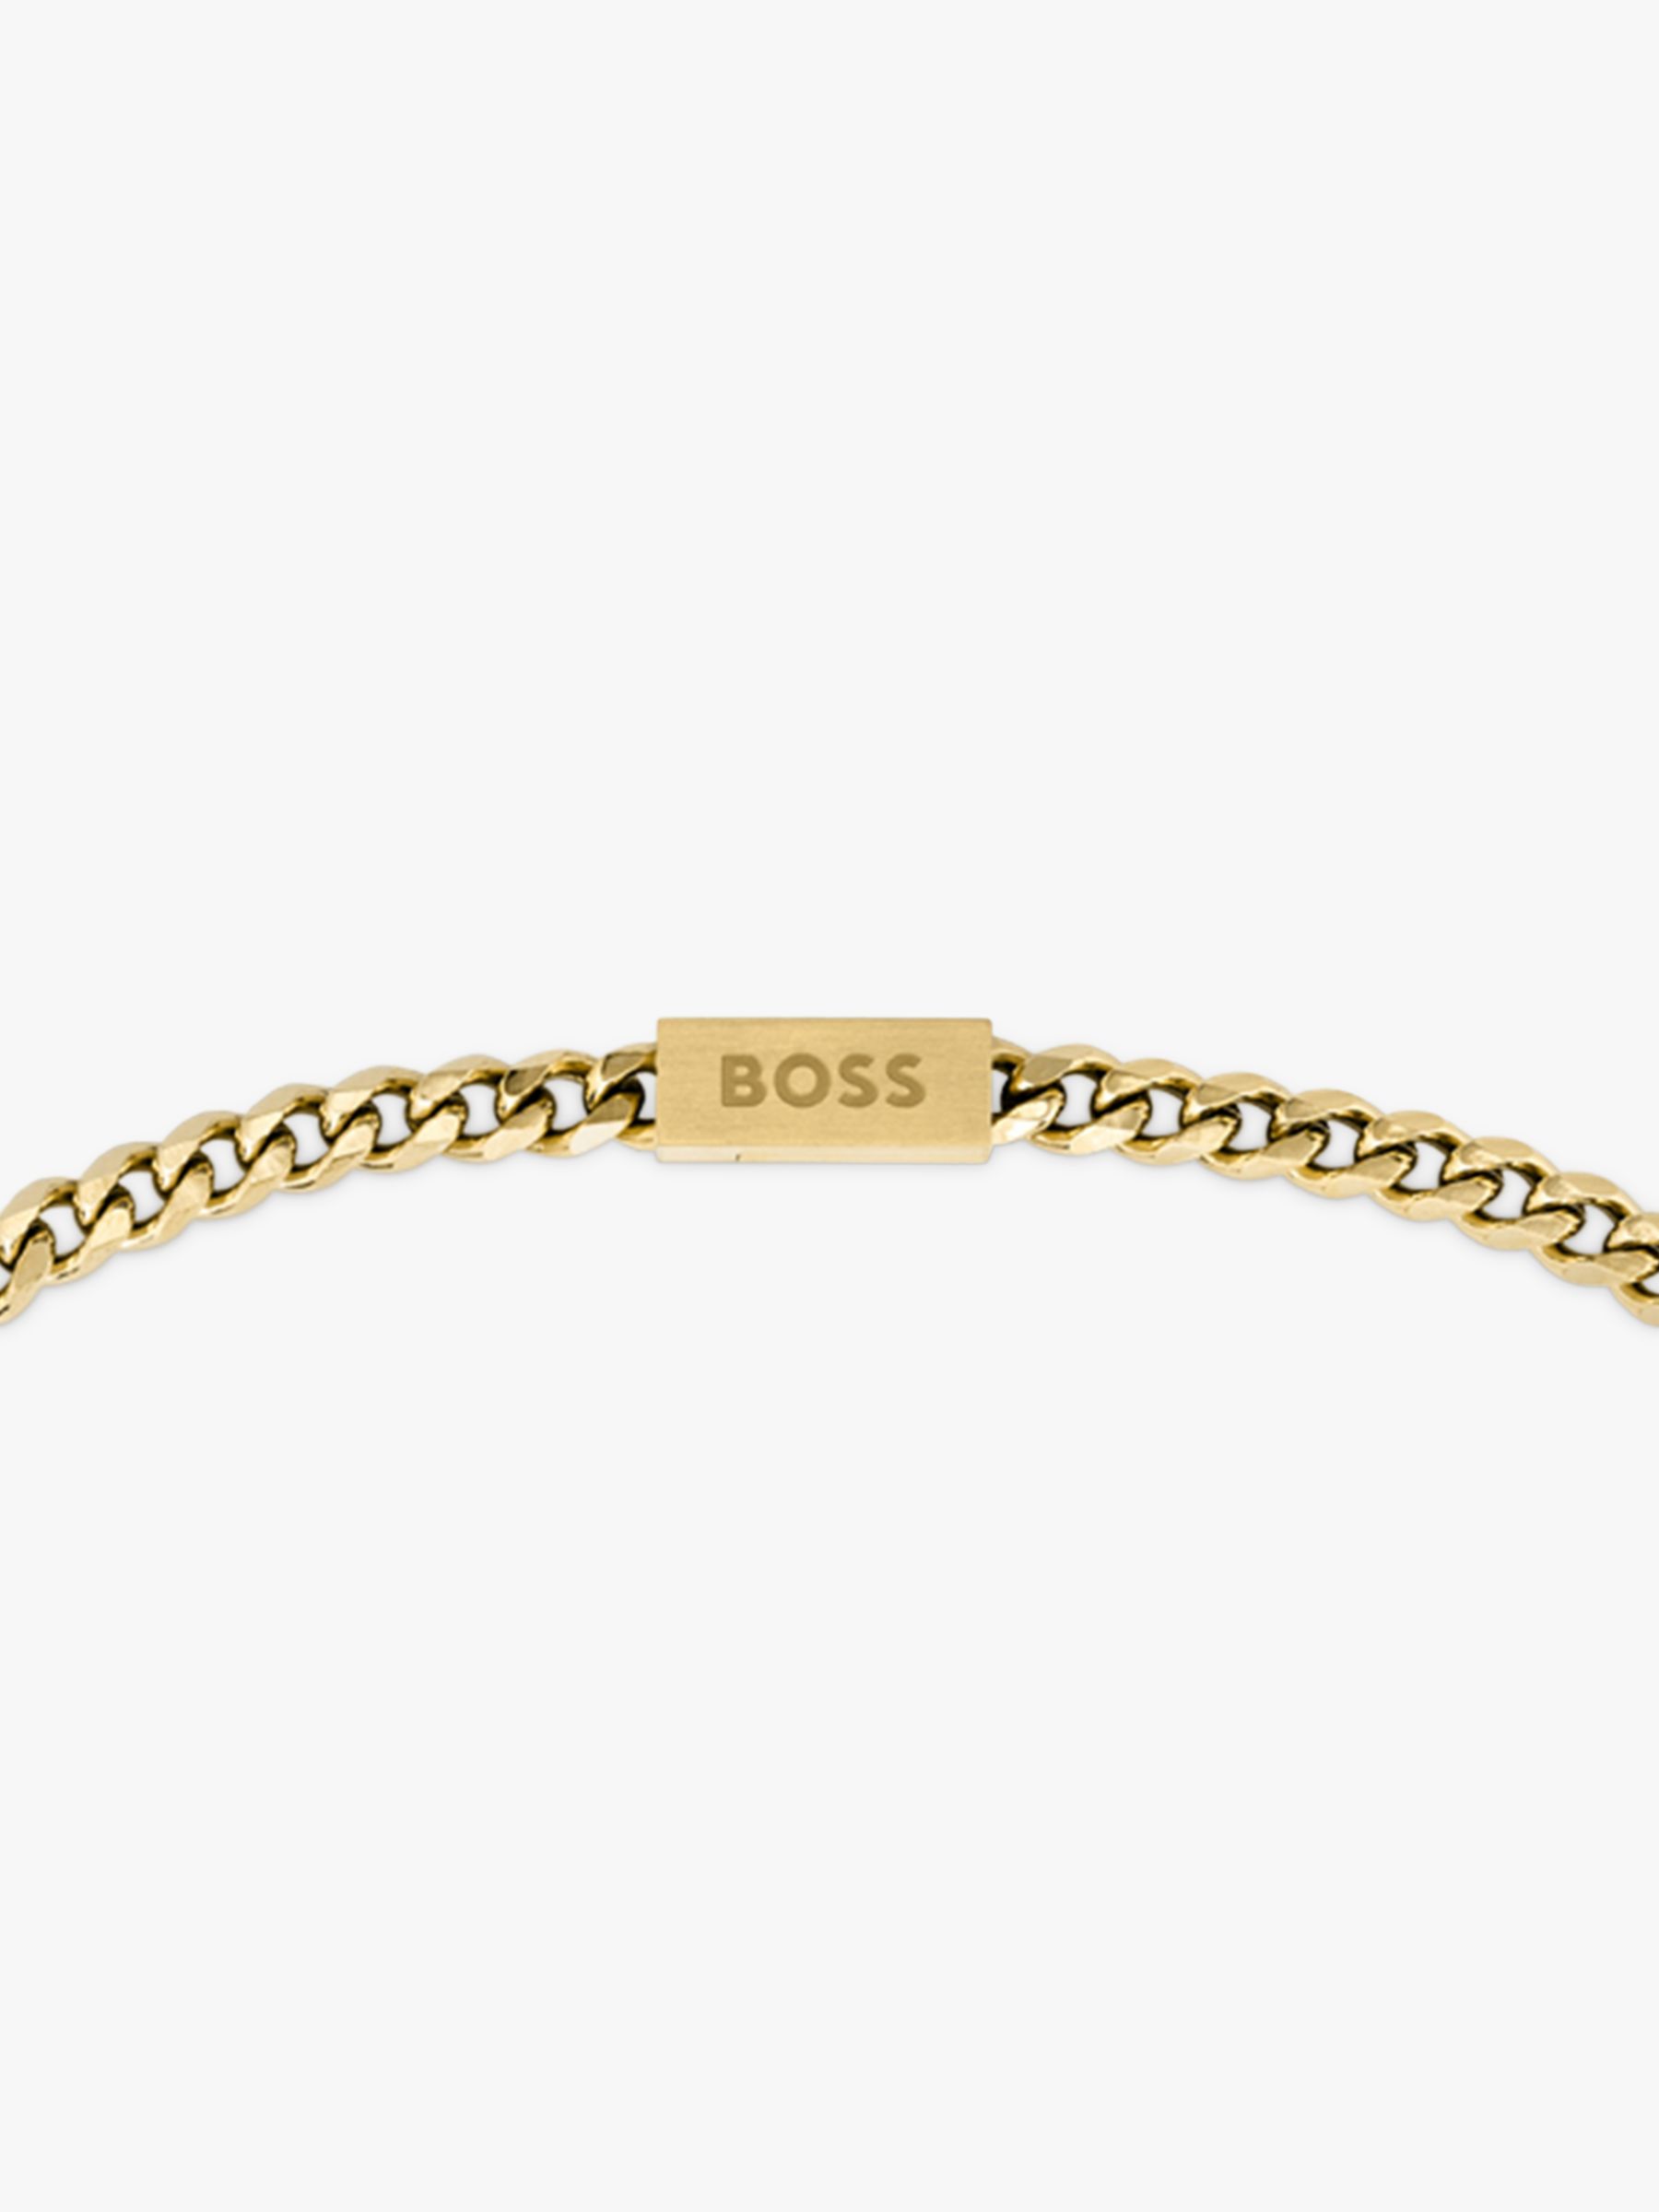 Buy BOSS Men's Him Collection Chain Necklace, Gold Online at johnlewis.com